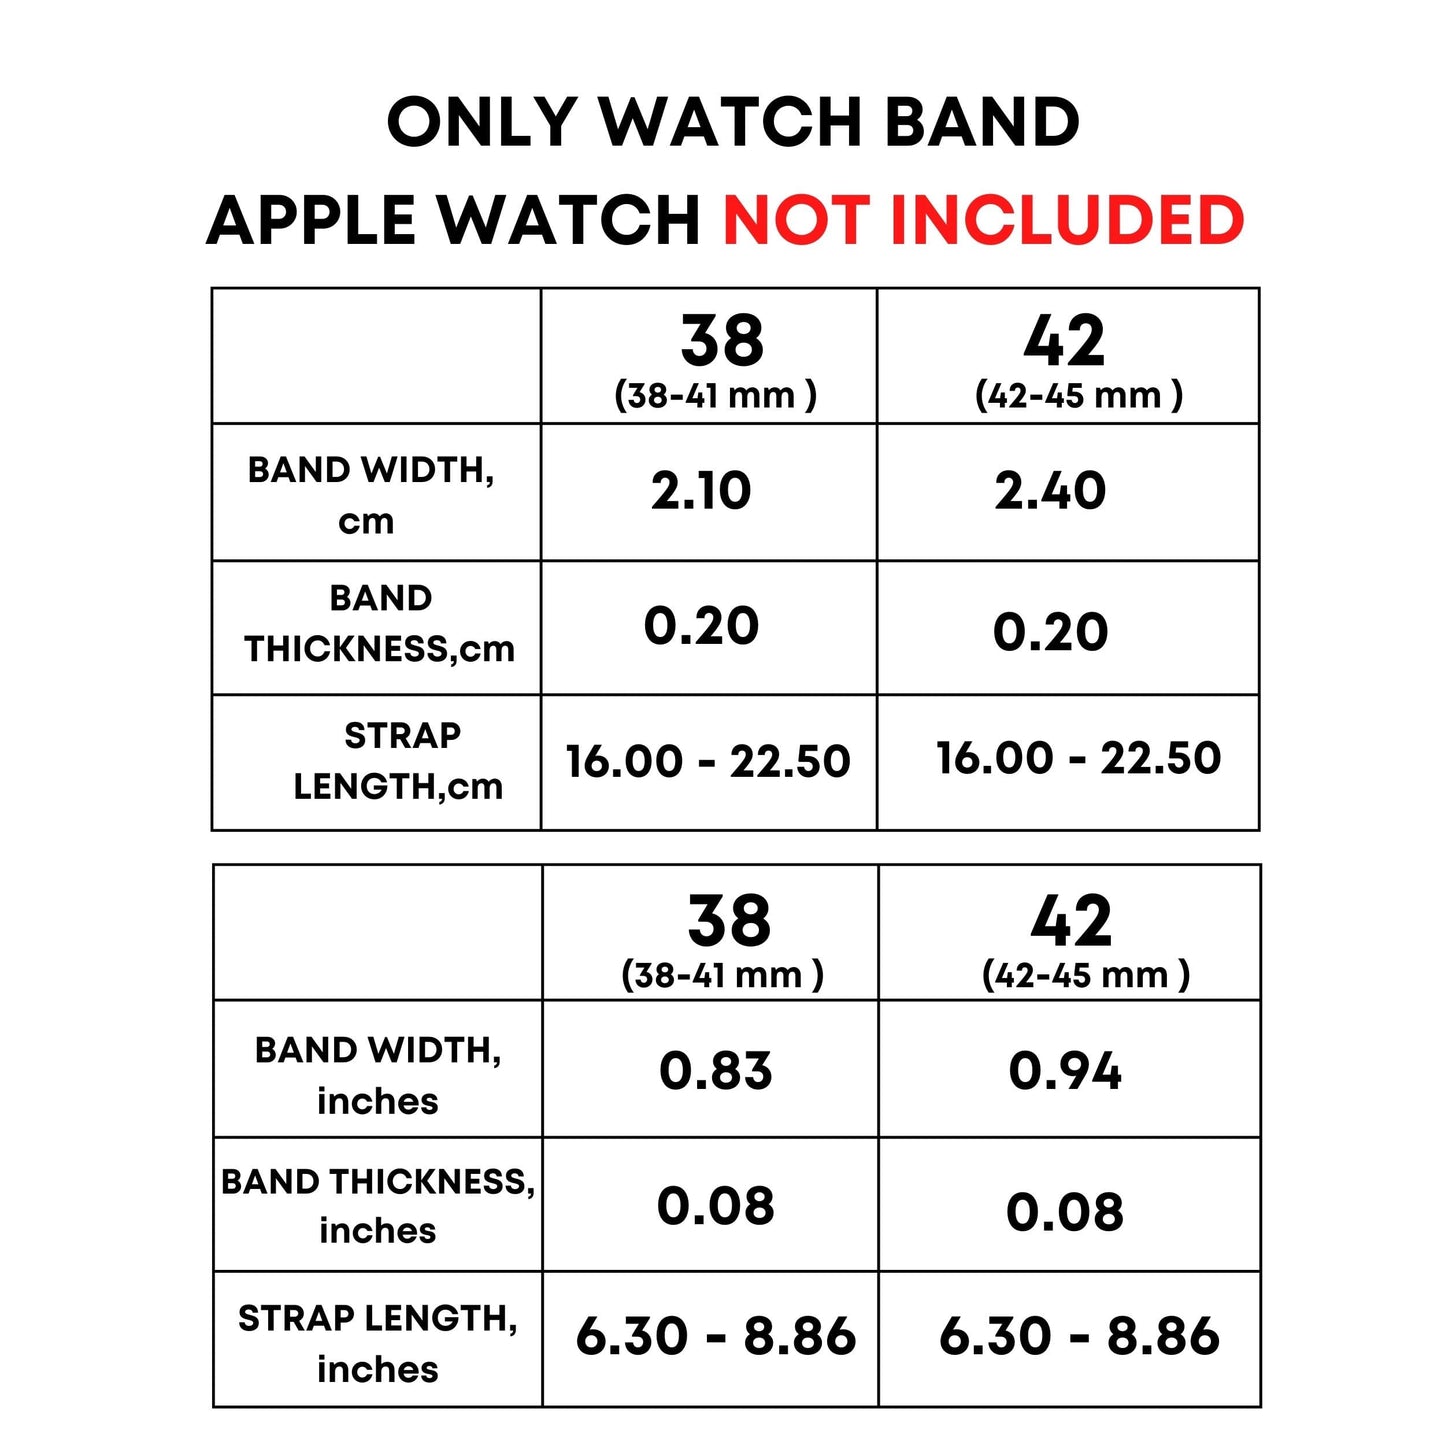 puppy play pride watch band for Apple iwatch, measurements